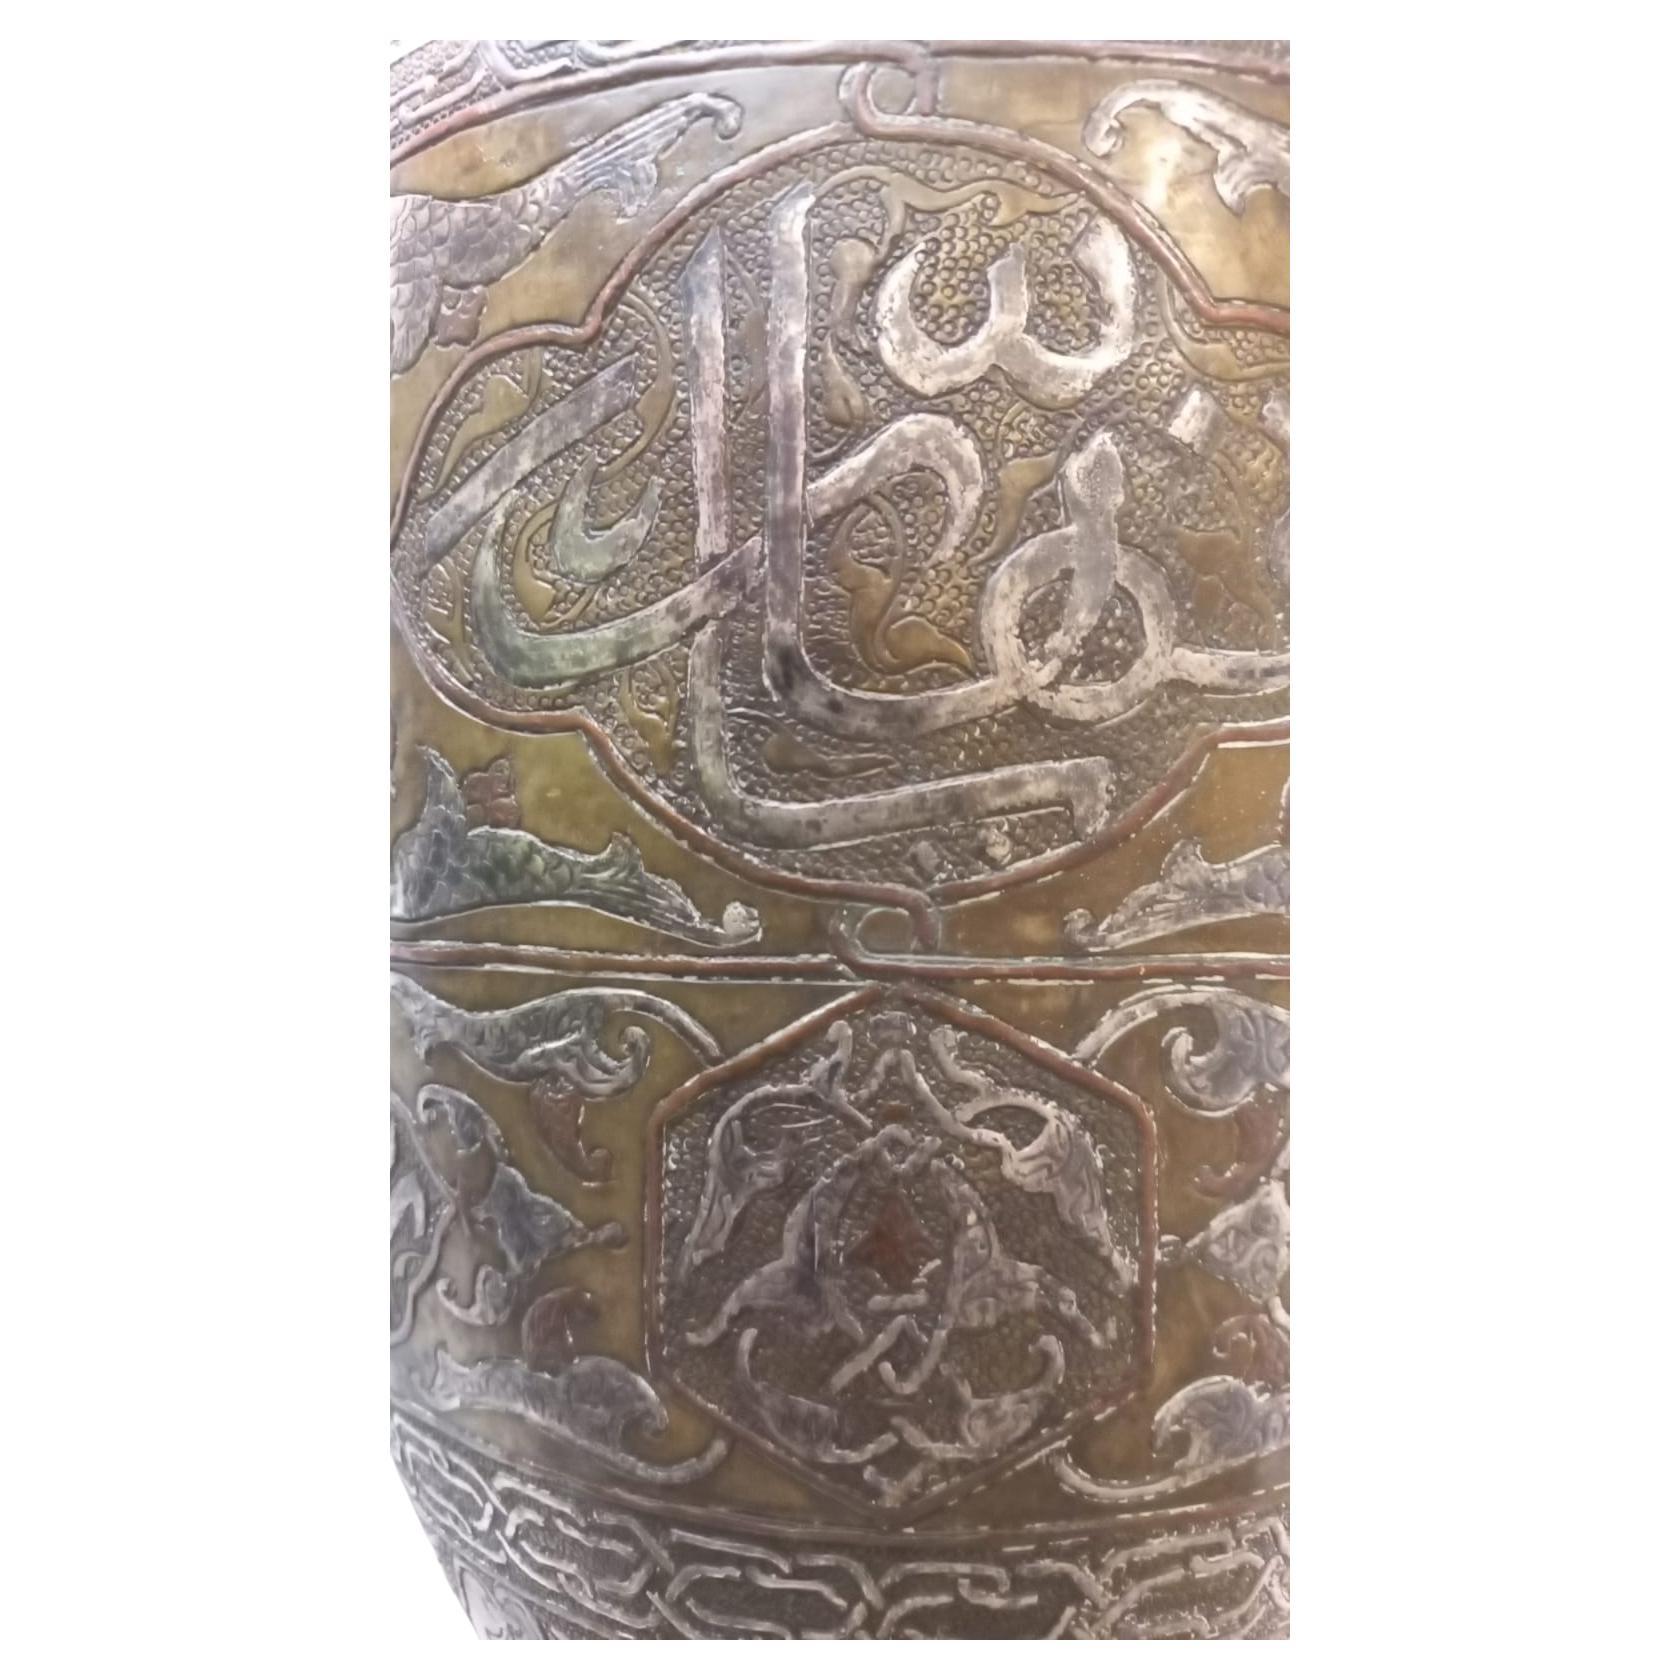 Antique Persian Islamic Brass Vase with Silver Inlay 19th Century For Sale 5